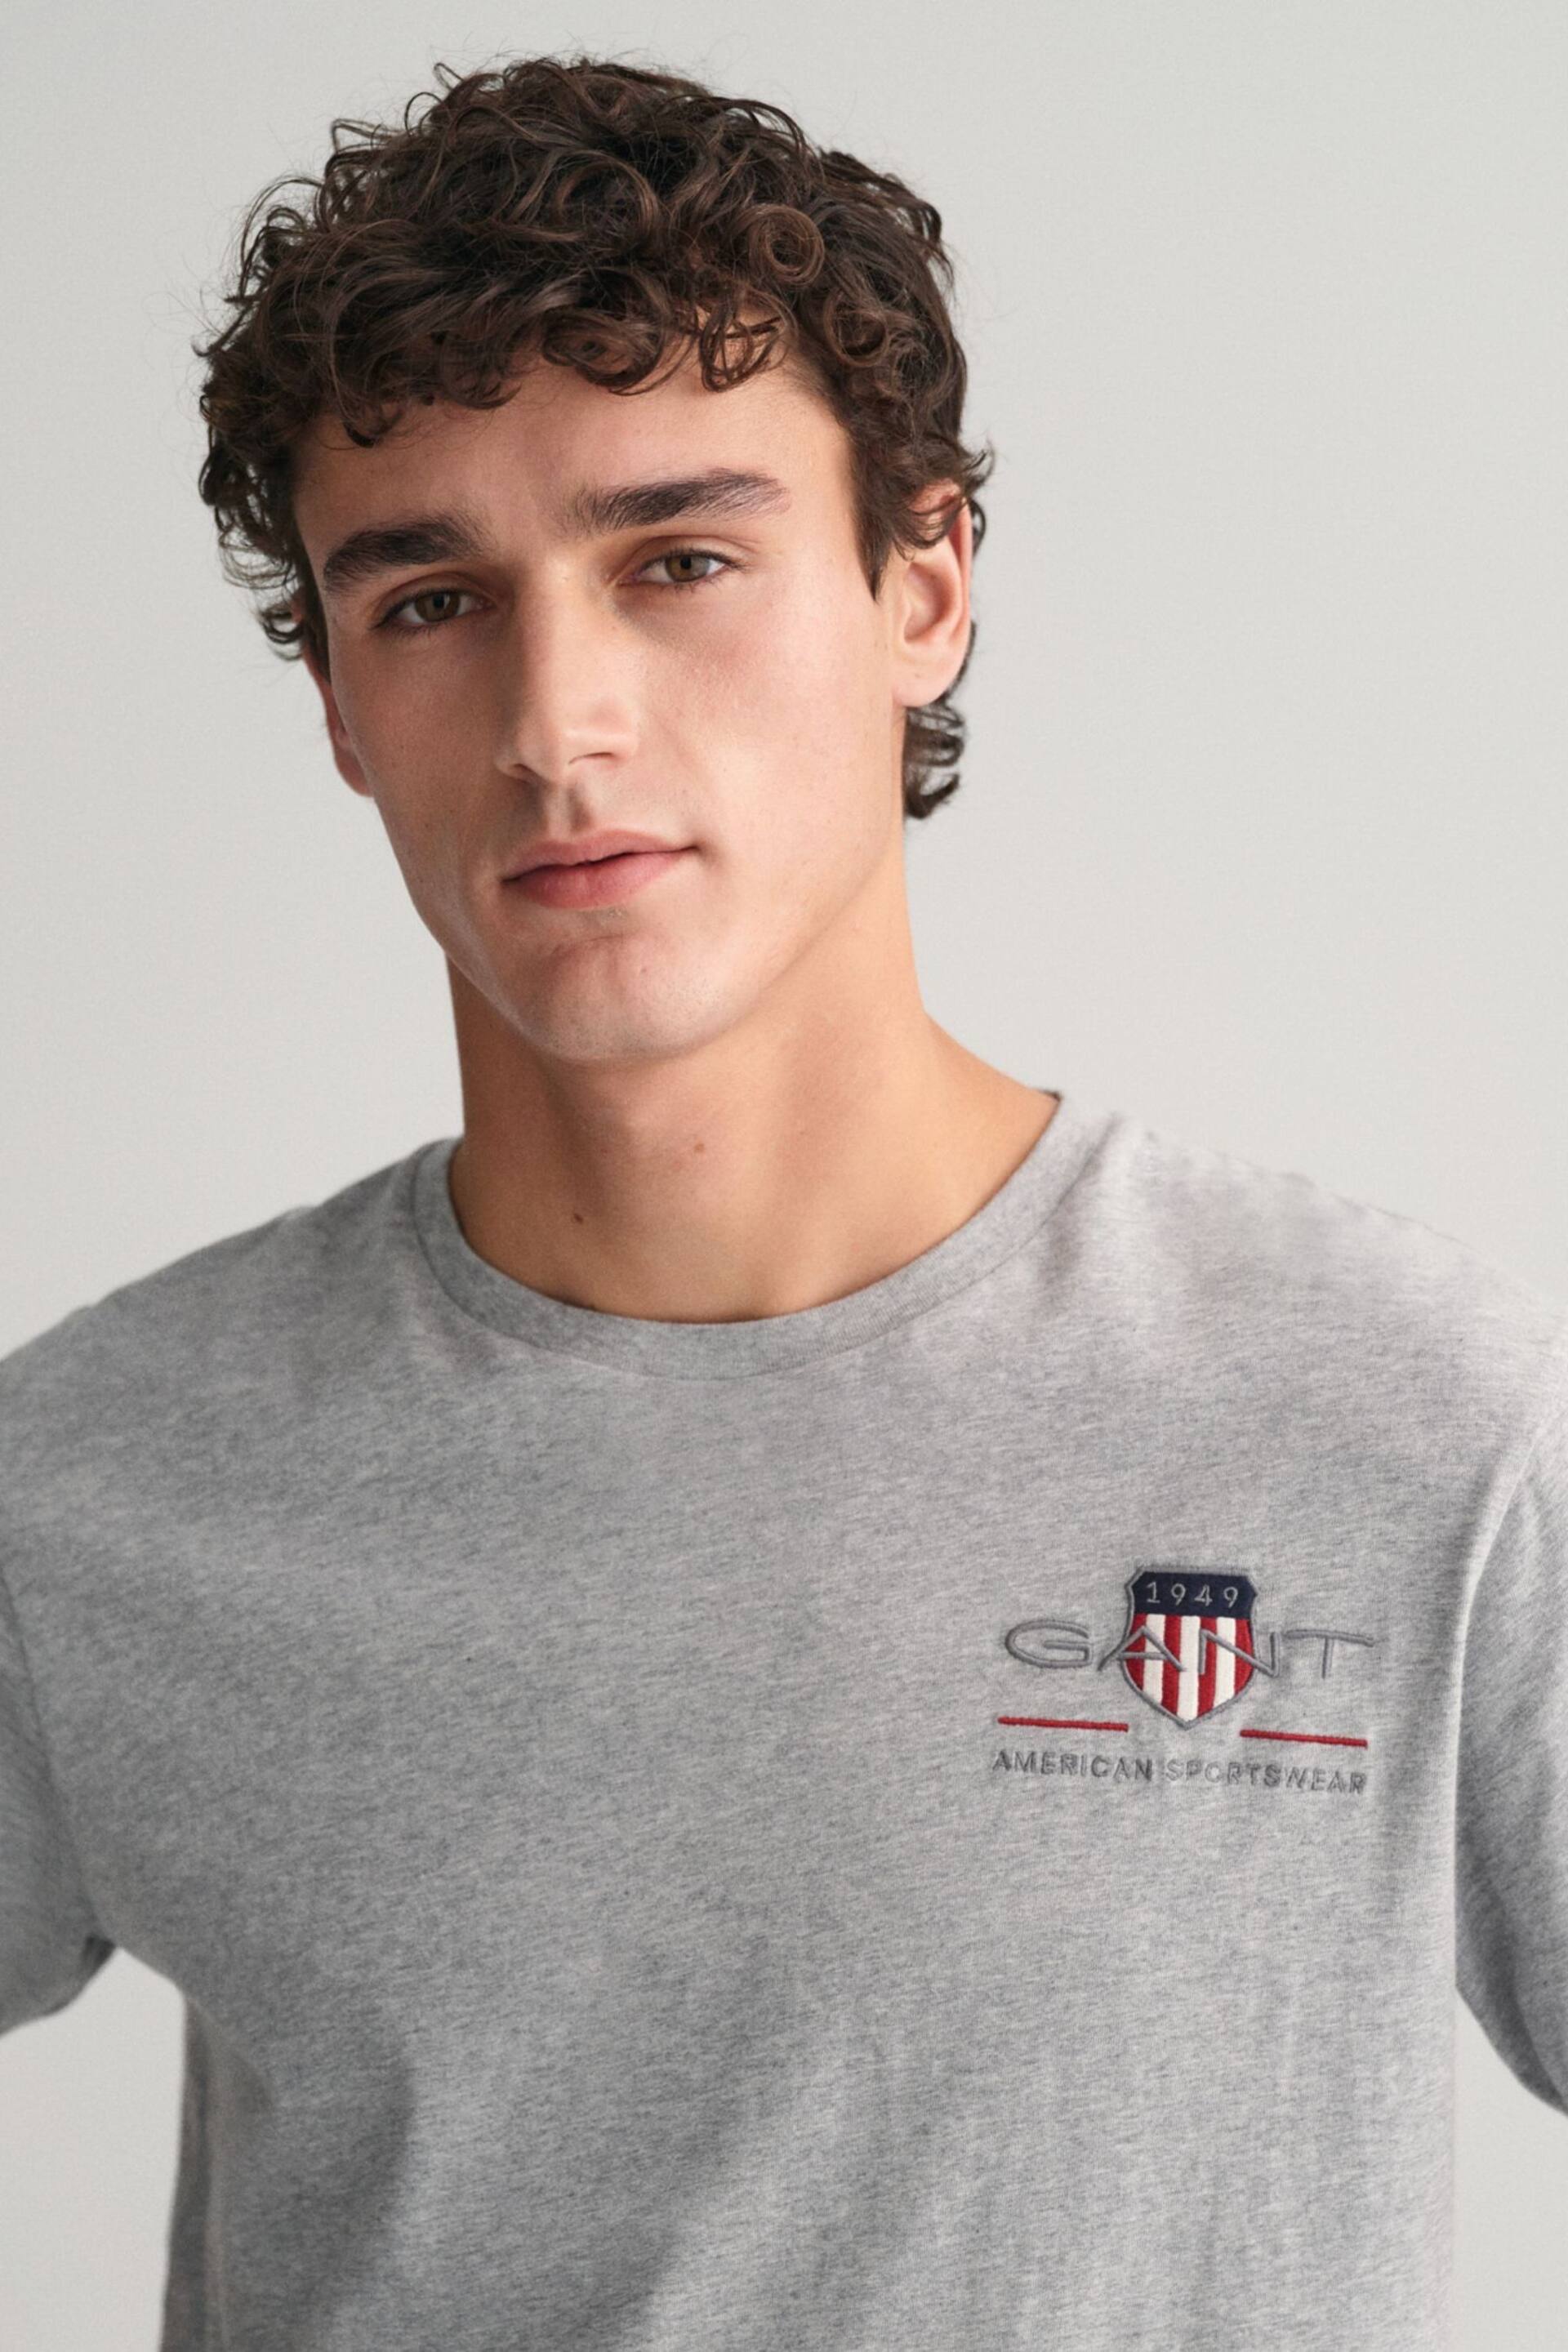 GANT Embroidered Archive Shield T-Shirt - Image 3 of 5